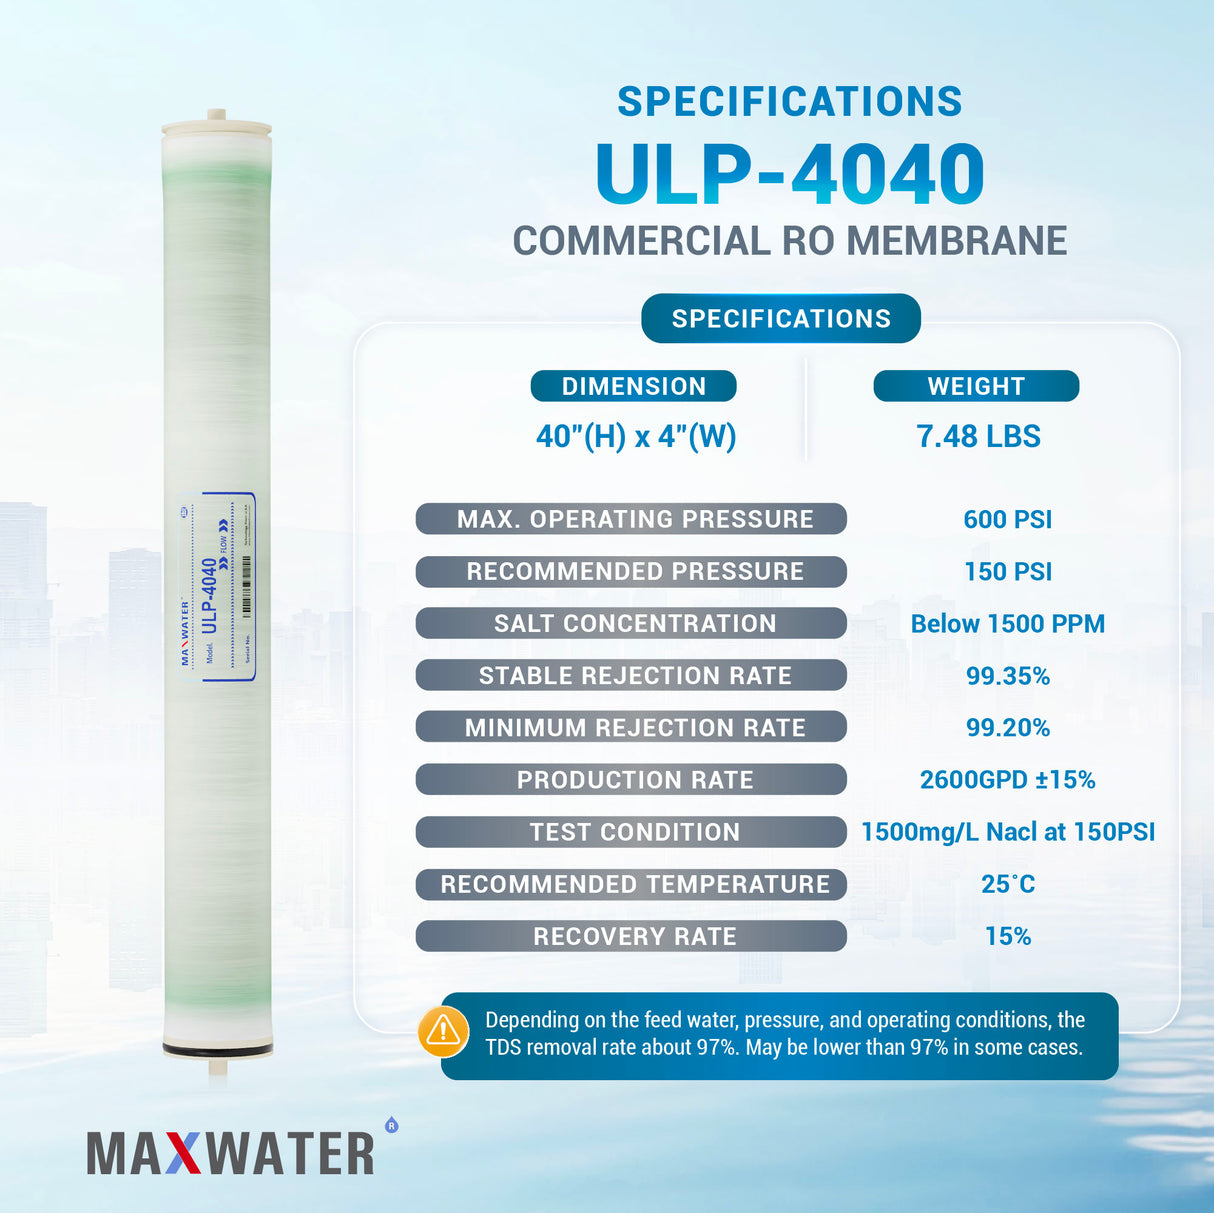 Efficient 4x40-inch RO membrane tailored for ultra low-pressure applications - advanced ULP variant.